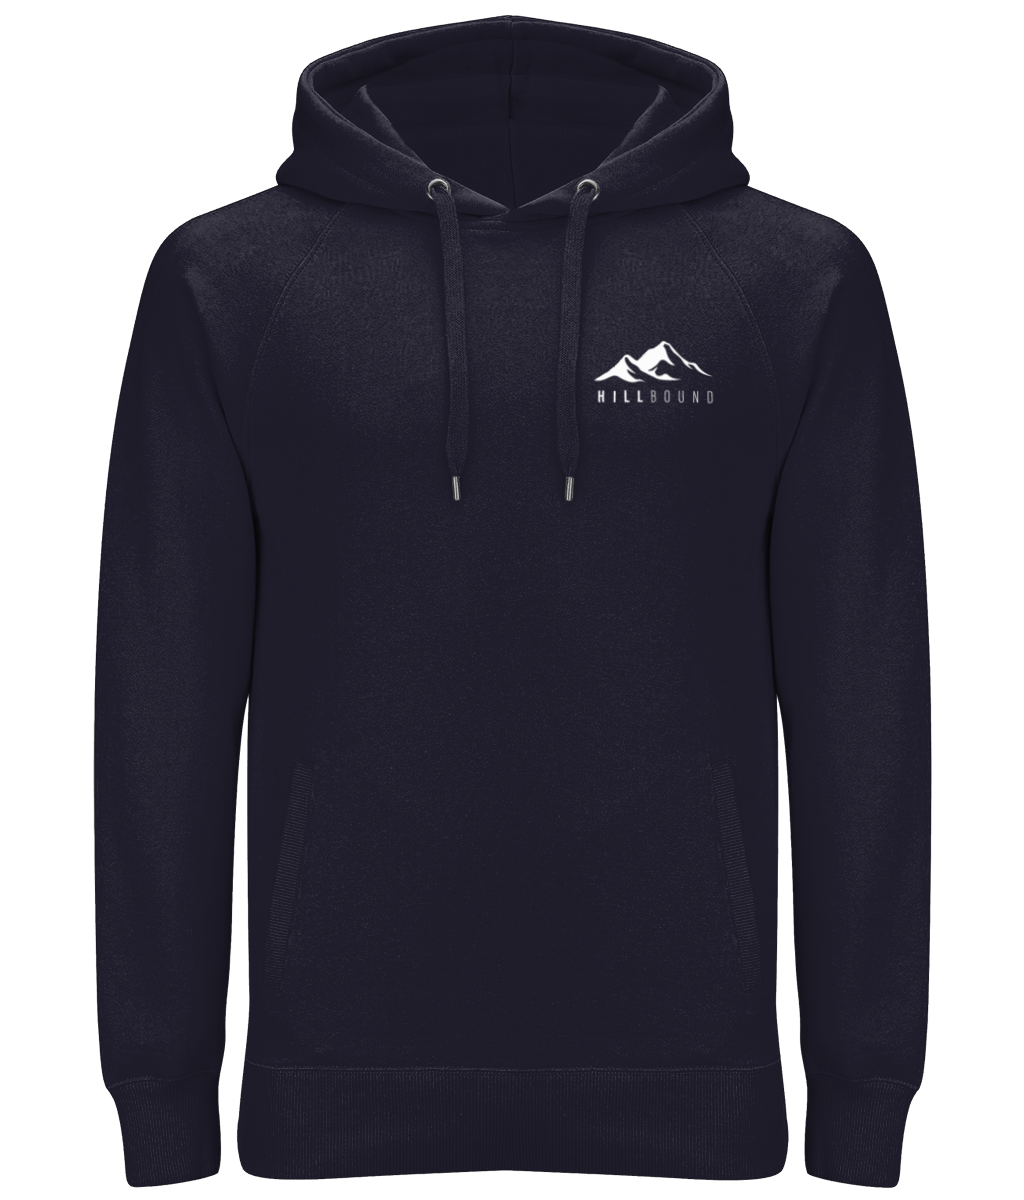 Hillbound Earth Positive Hoodie